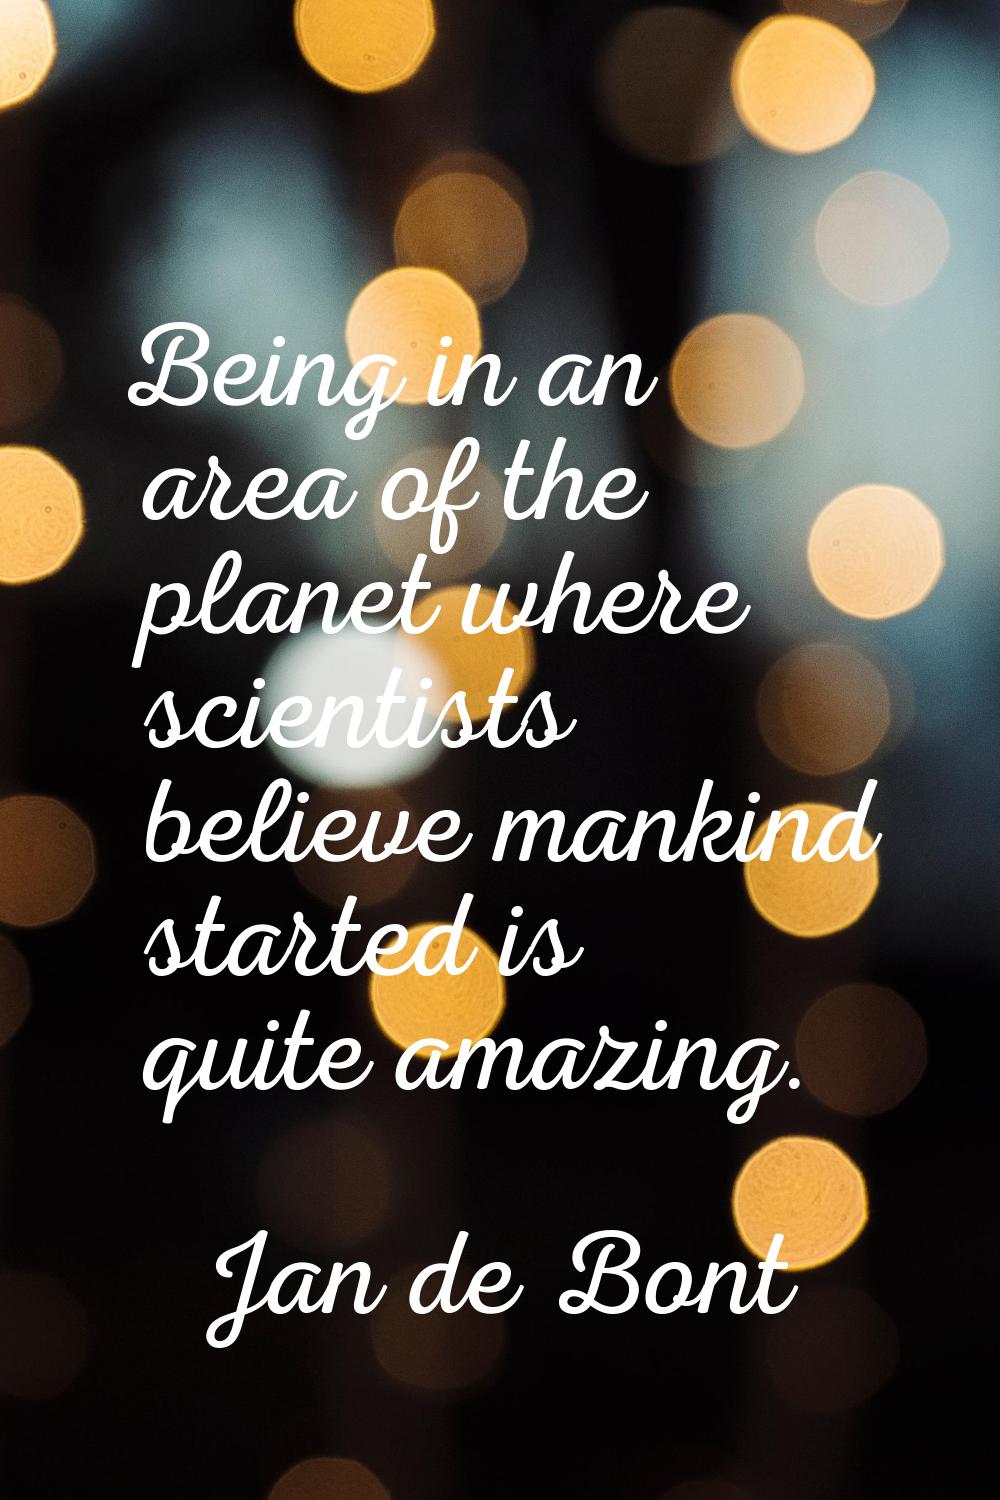 Being in an area of the planet where scientists believe mankind started is quite amazing.